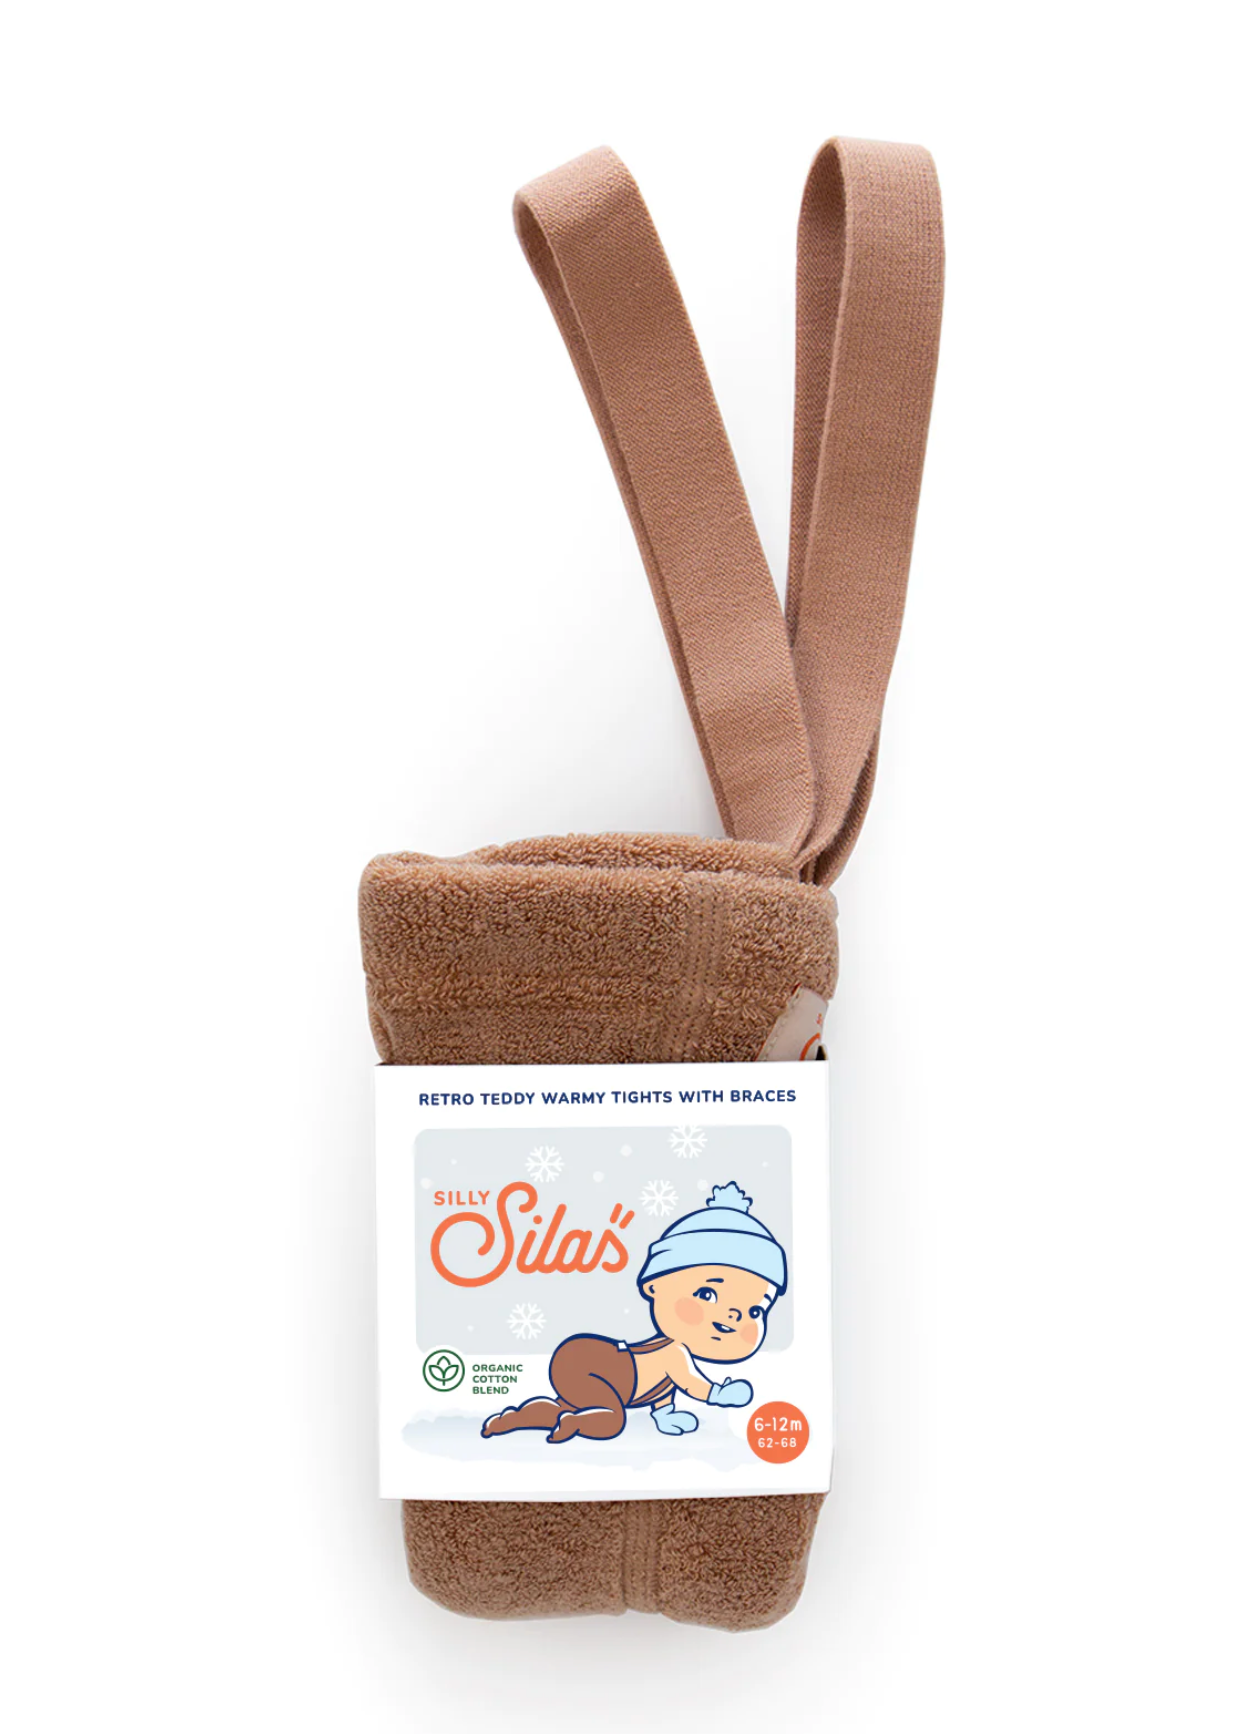 Silly Silas - Granny Teddy Strumpfhose mit Fuss "Granny Teddy Footed Cotton Tights" |  light brown - Leja Concept Store